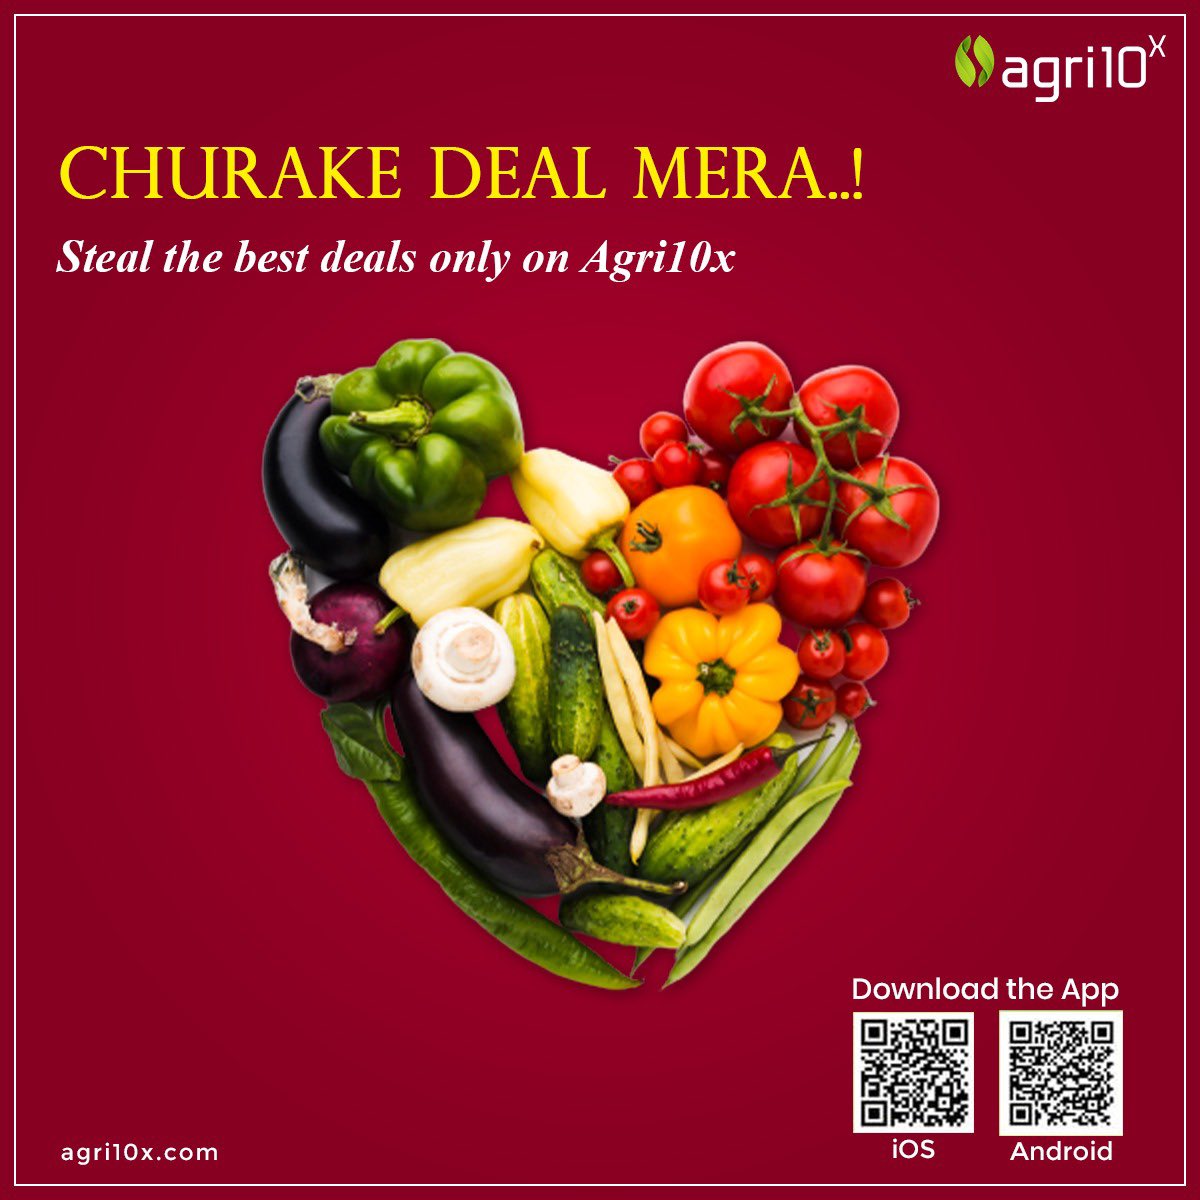 Grab it before anybody else steals the best deals! Find the most competitive prices only on Agri10x, download the app today. #Agri10x #Agritech #Quality #Fruits #Vegetables #OnlineTrade #Followformore